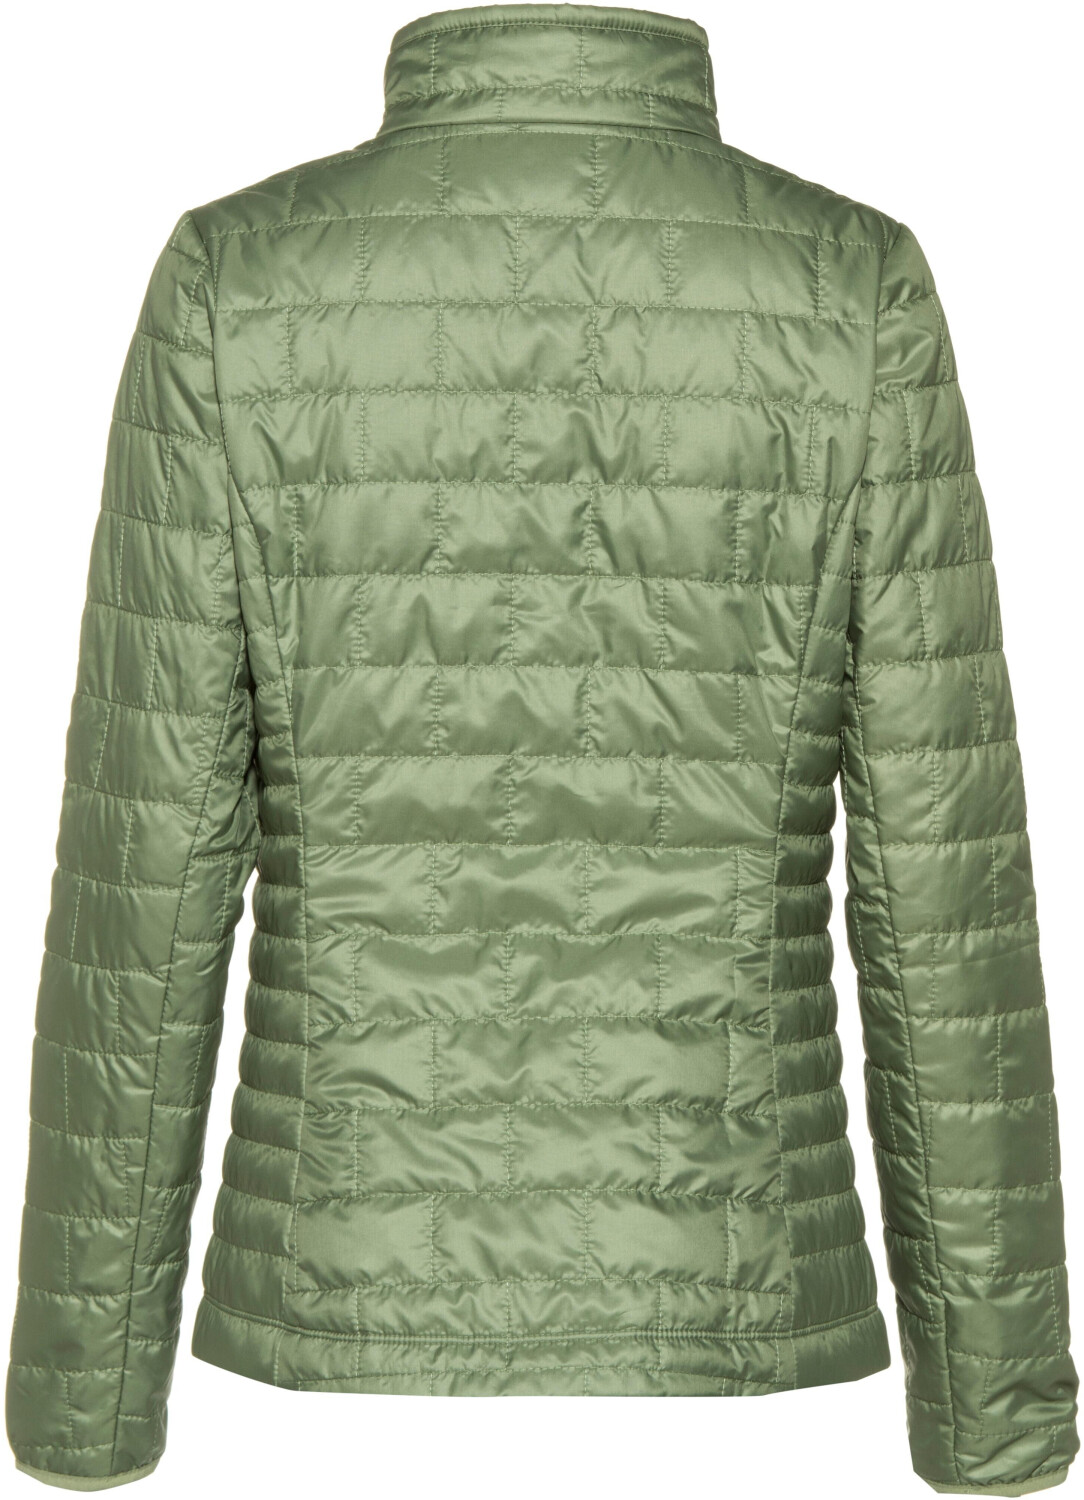 Buy Patagonia Women's Nano Puff Jacket Sedge Green from £190.00 (Today) –  Best Deals on